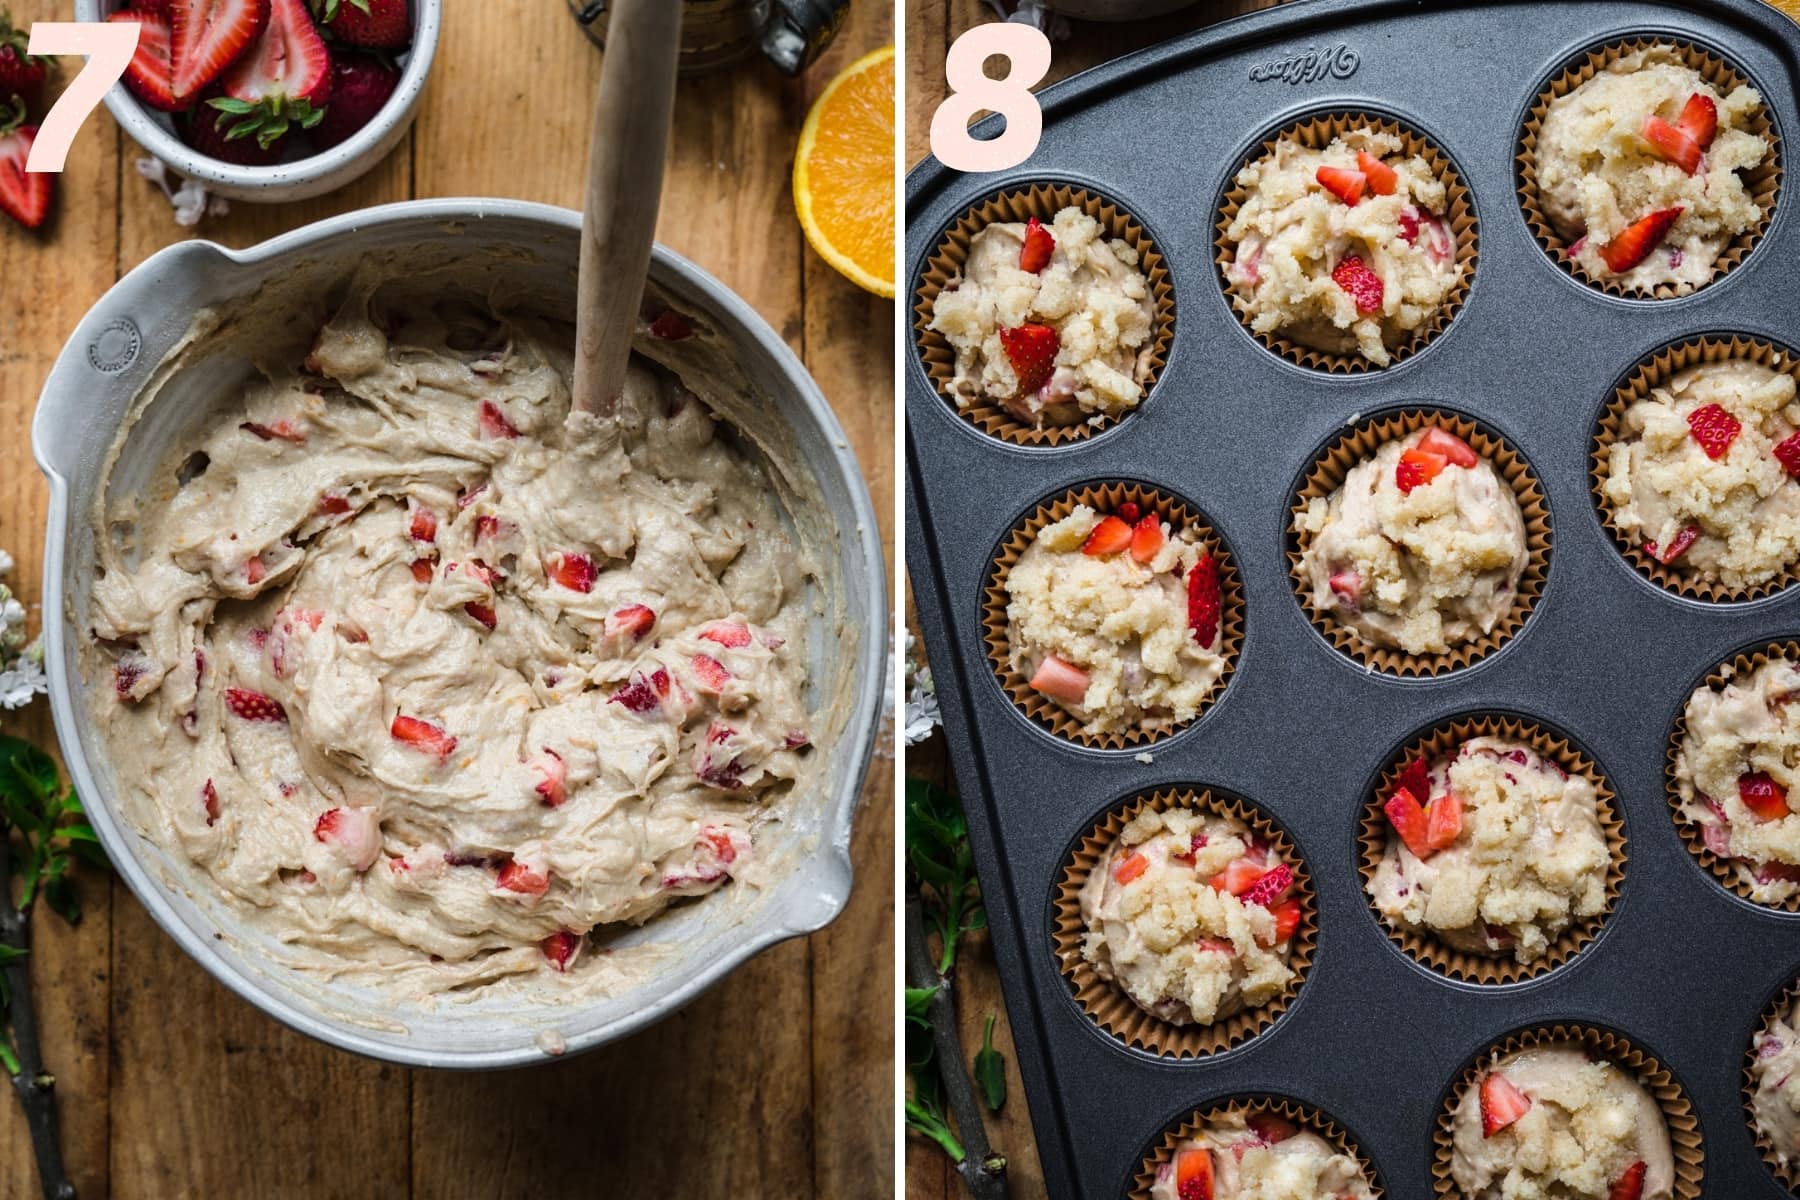 on the left: vegan strawberry muffin batter in mixing bowl. on the right: vegan strawberry muffin batter in muffin tins. 